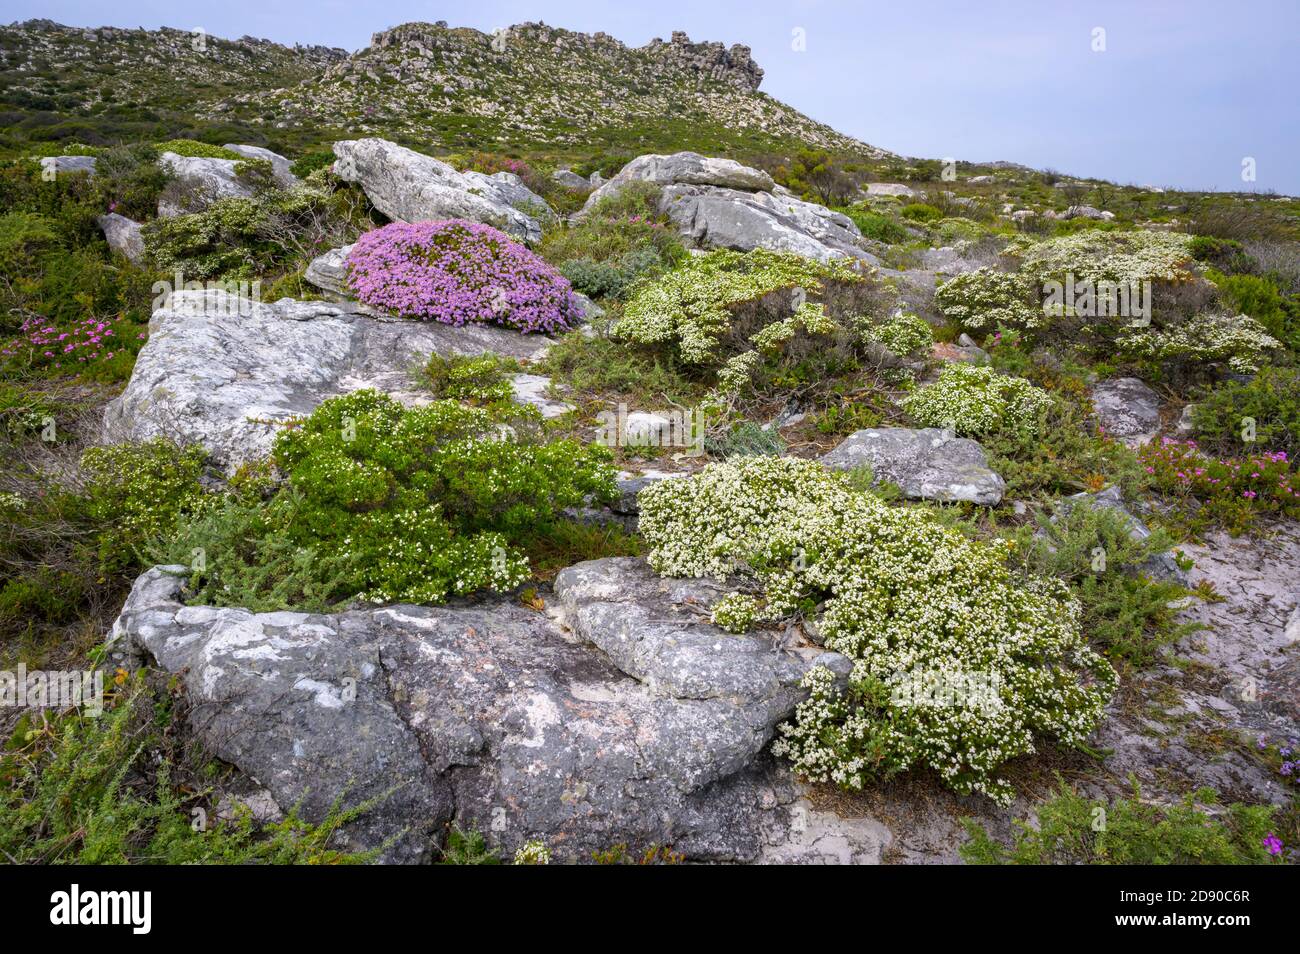 Flowers and vegetation in landscape near cape of good hope, Table mountain national park, South Africa. Stock Photo